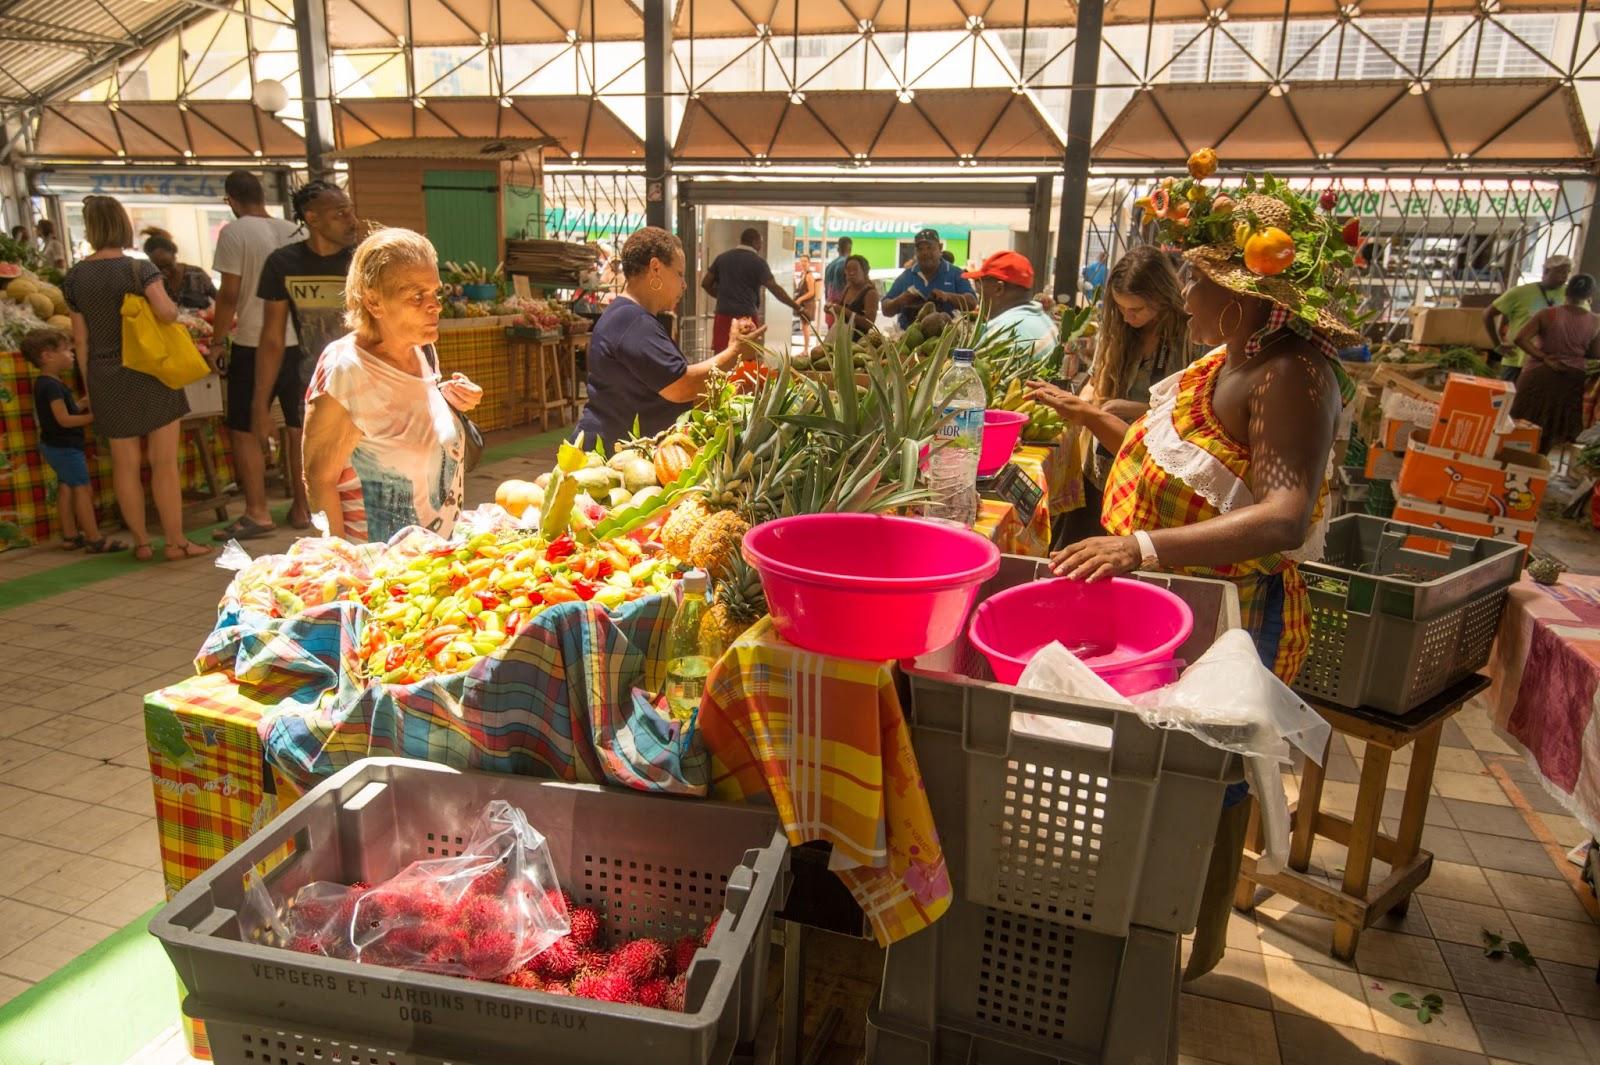 Covered Market in Fort-De-France, Martinique Island. East Caribbean